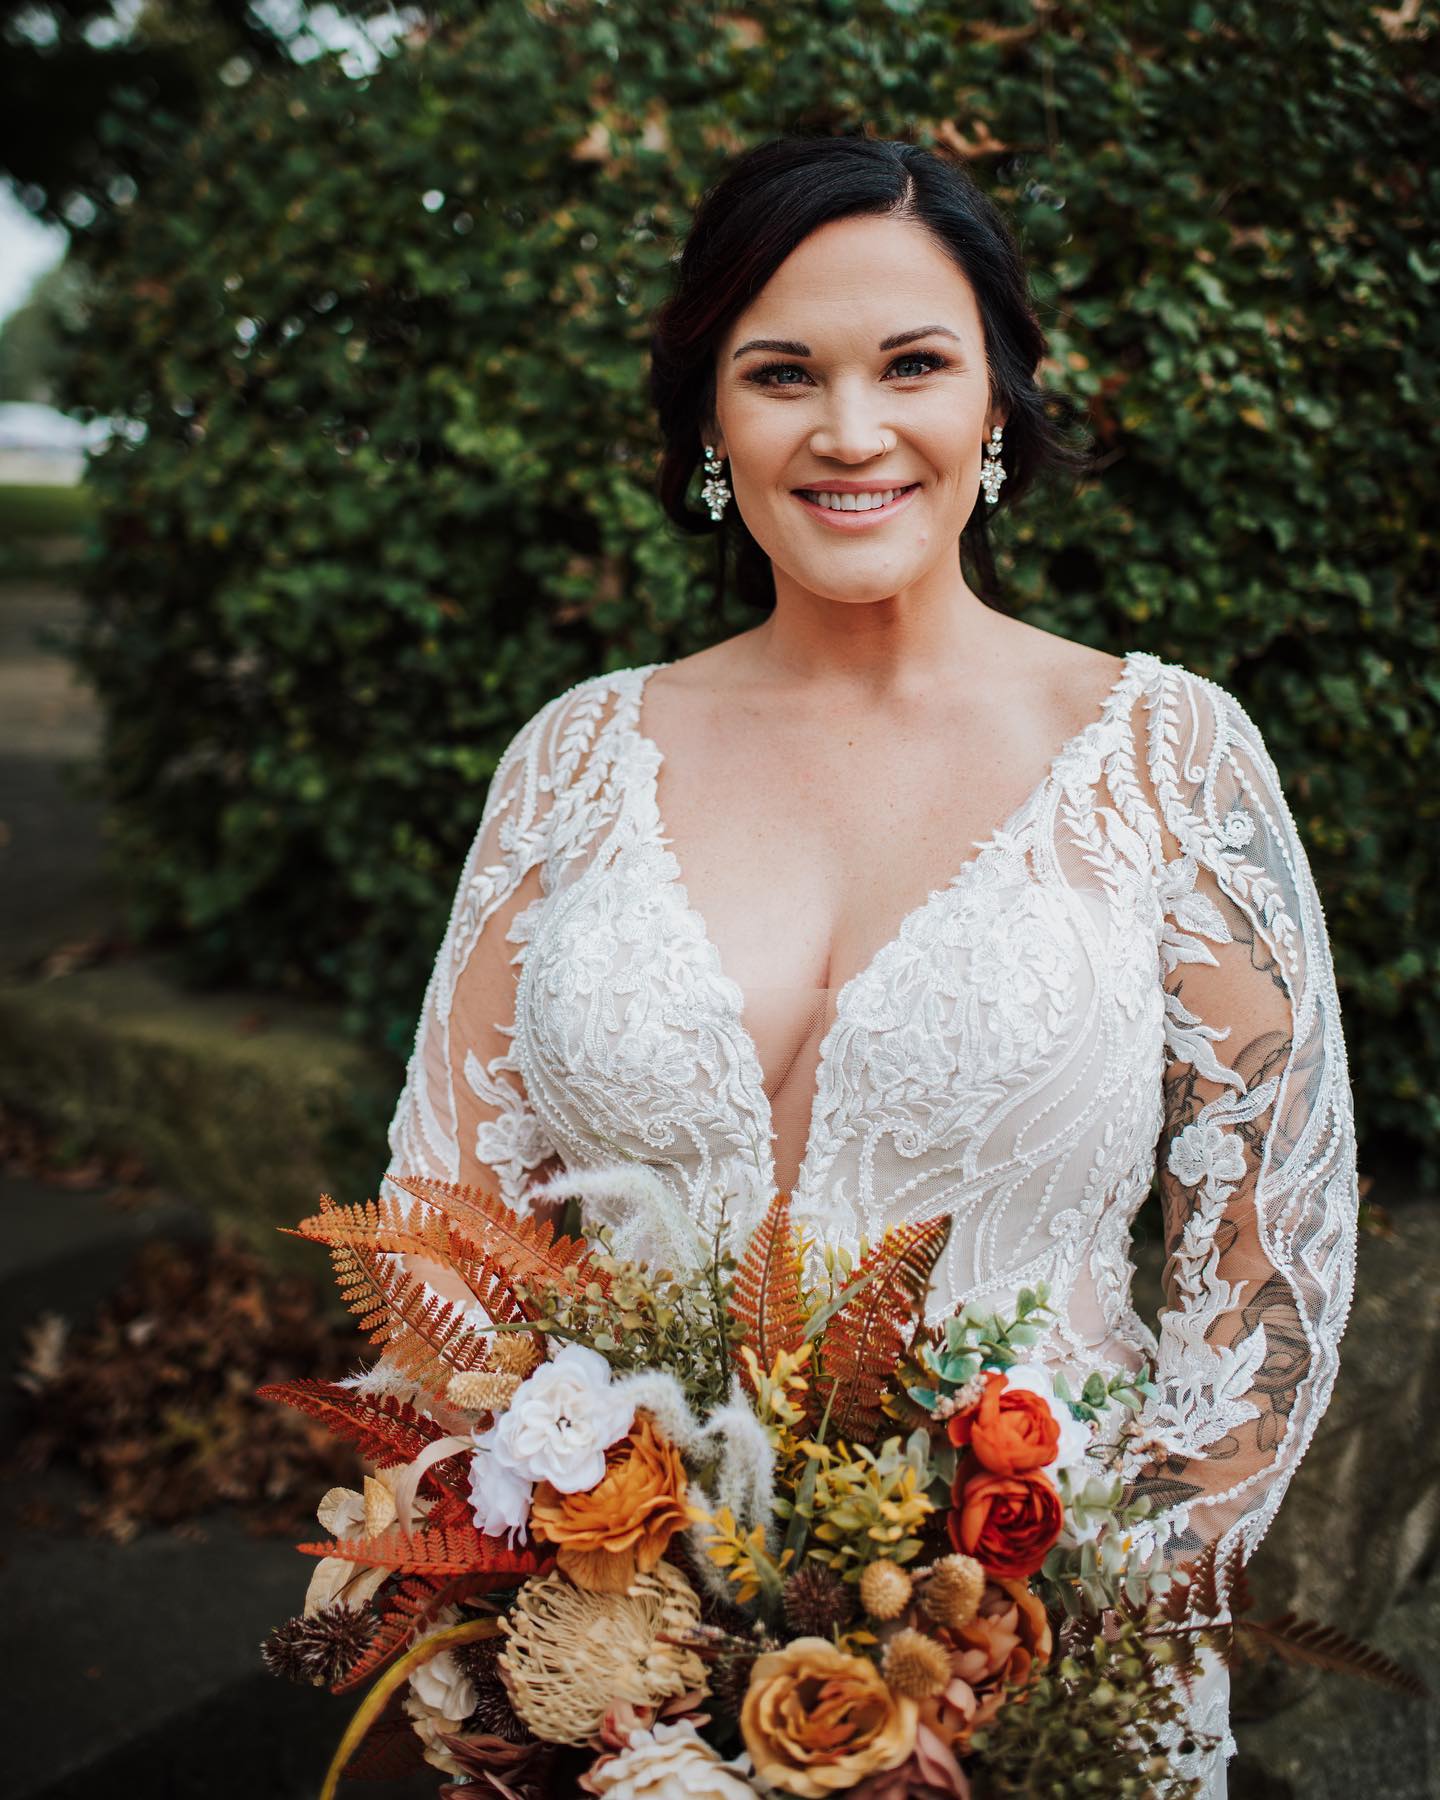 "Happiness and confidence are the prettiest things you can wear on your wedding day."

#raineyartistry #nowilting #nowater #noallergens  #foreverflorals #fauxreal #bouquettodaycenterpiecetomorrow #missouribride #bohobride #boho #bridalbouquet #midwestbride